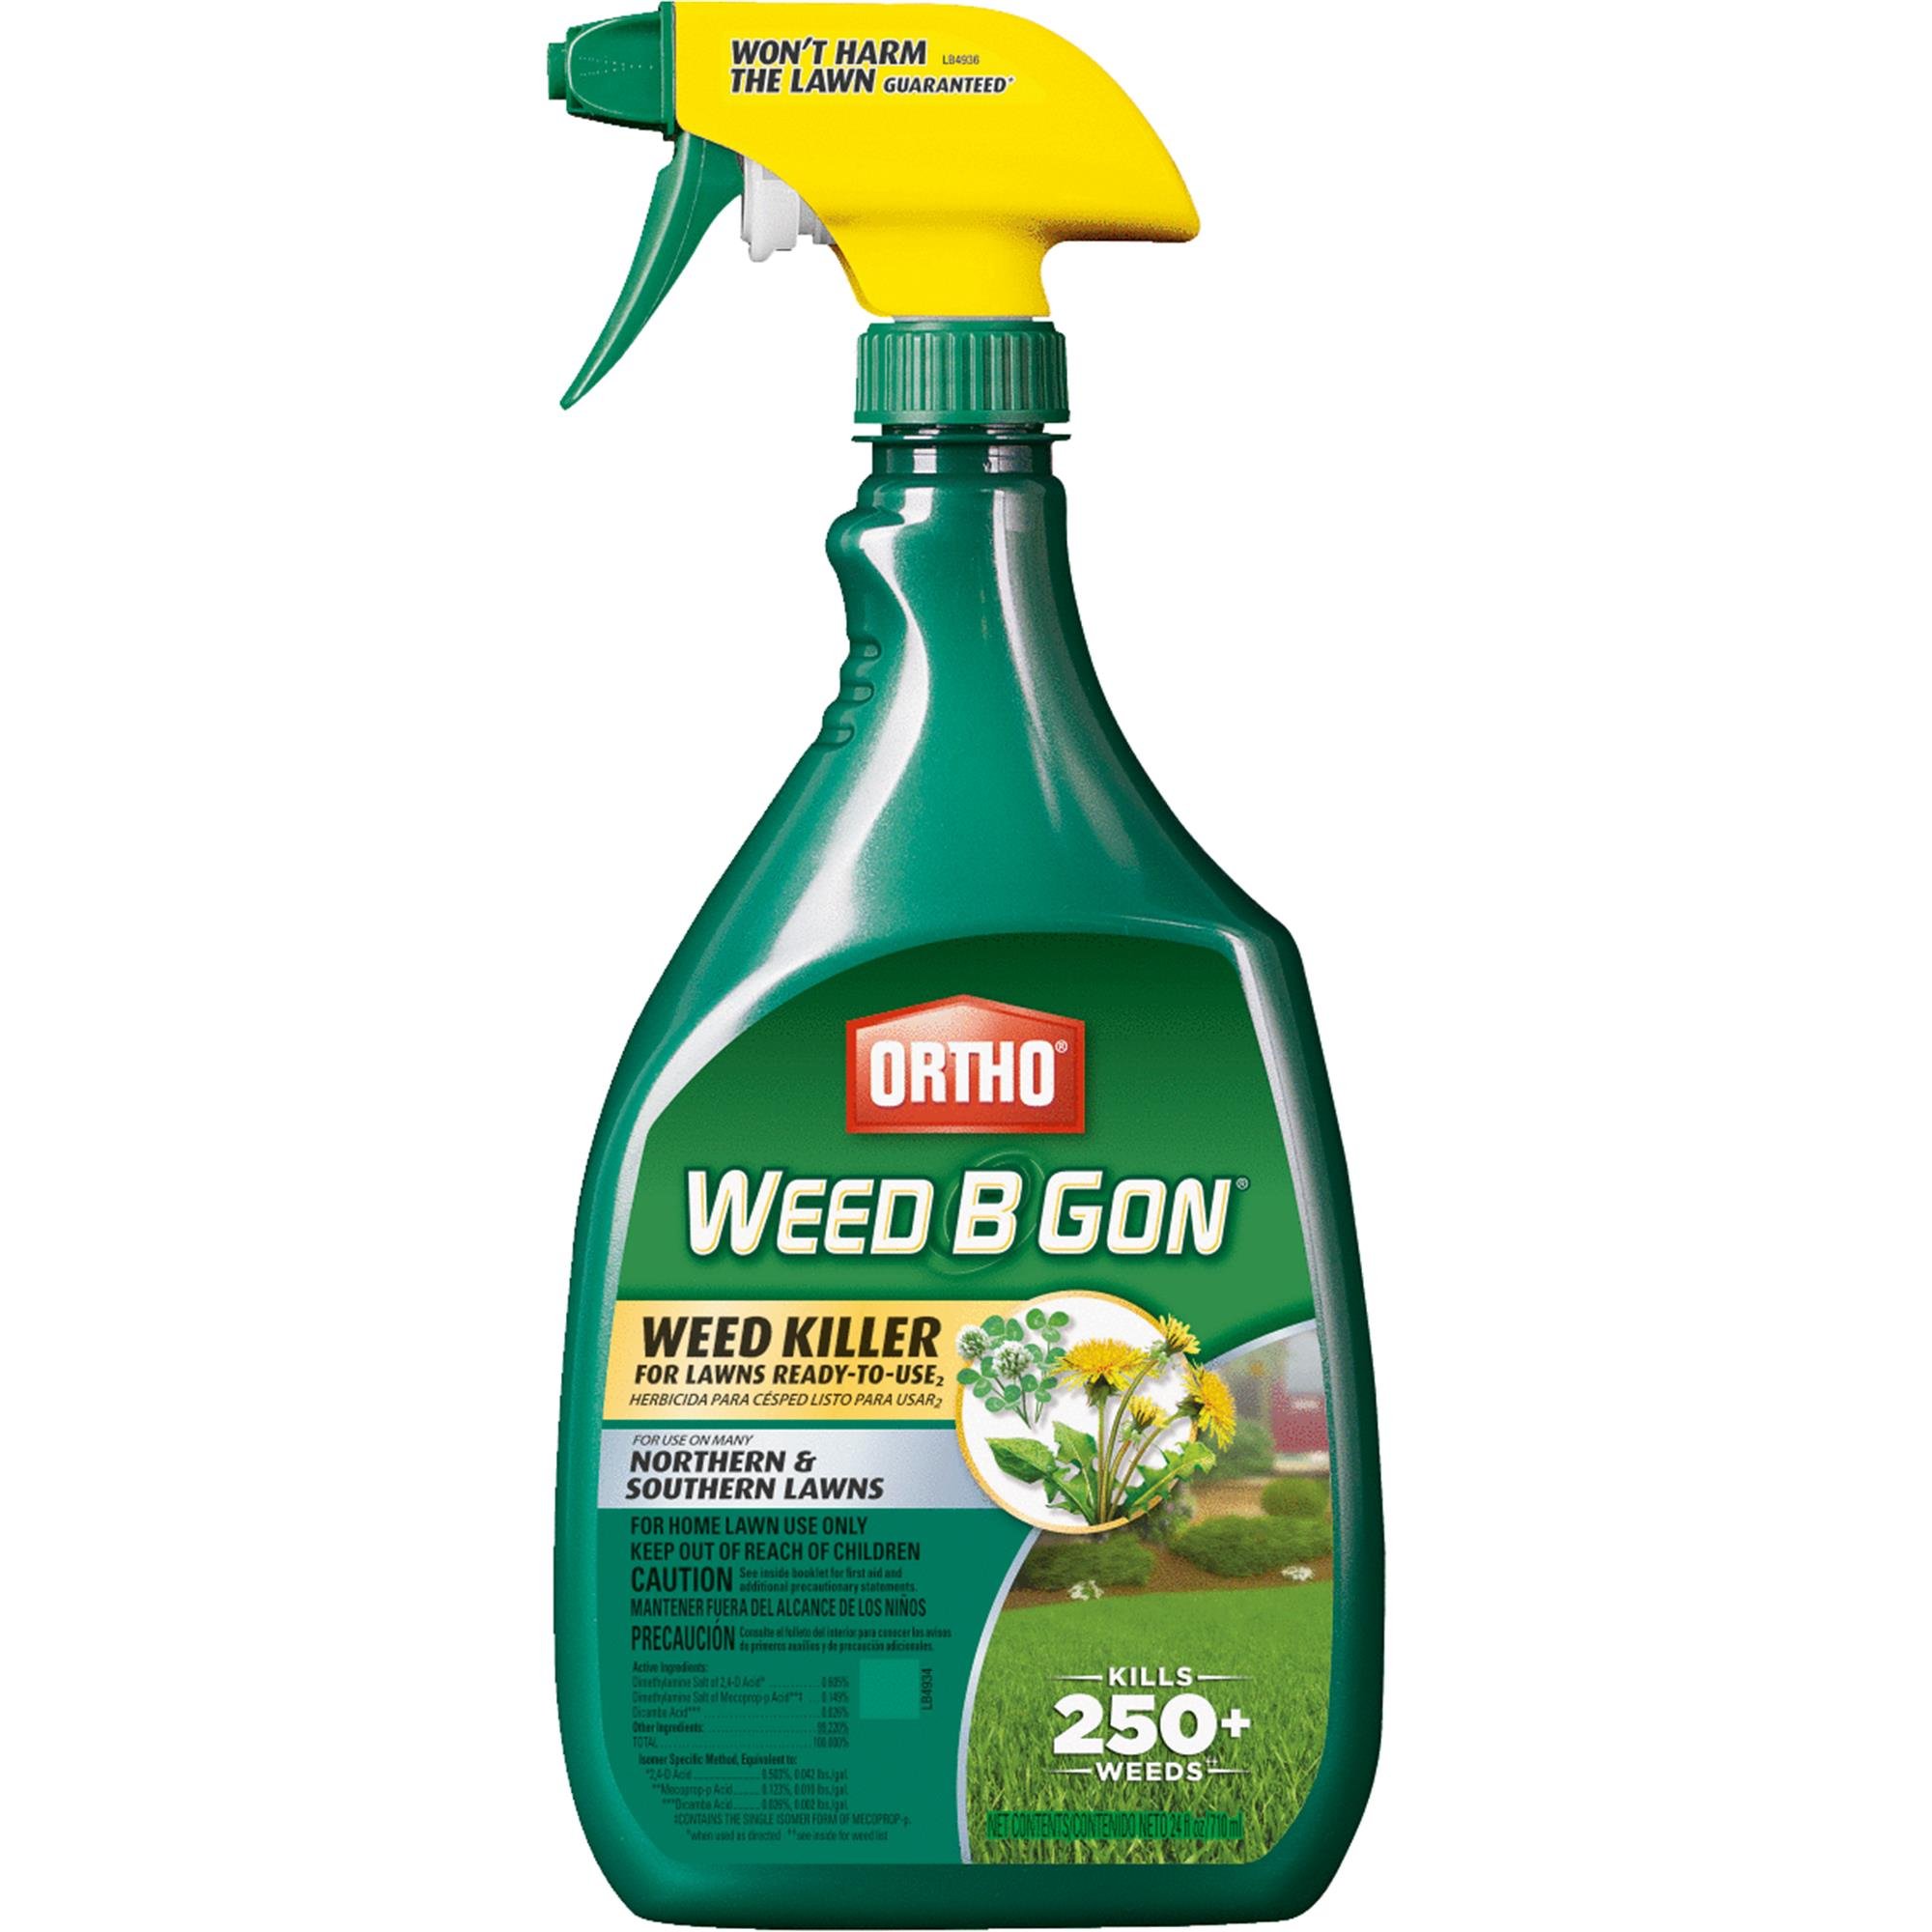 Ortho Weed B Gon Weed Killer for Lawns Ready